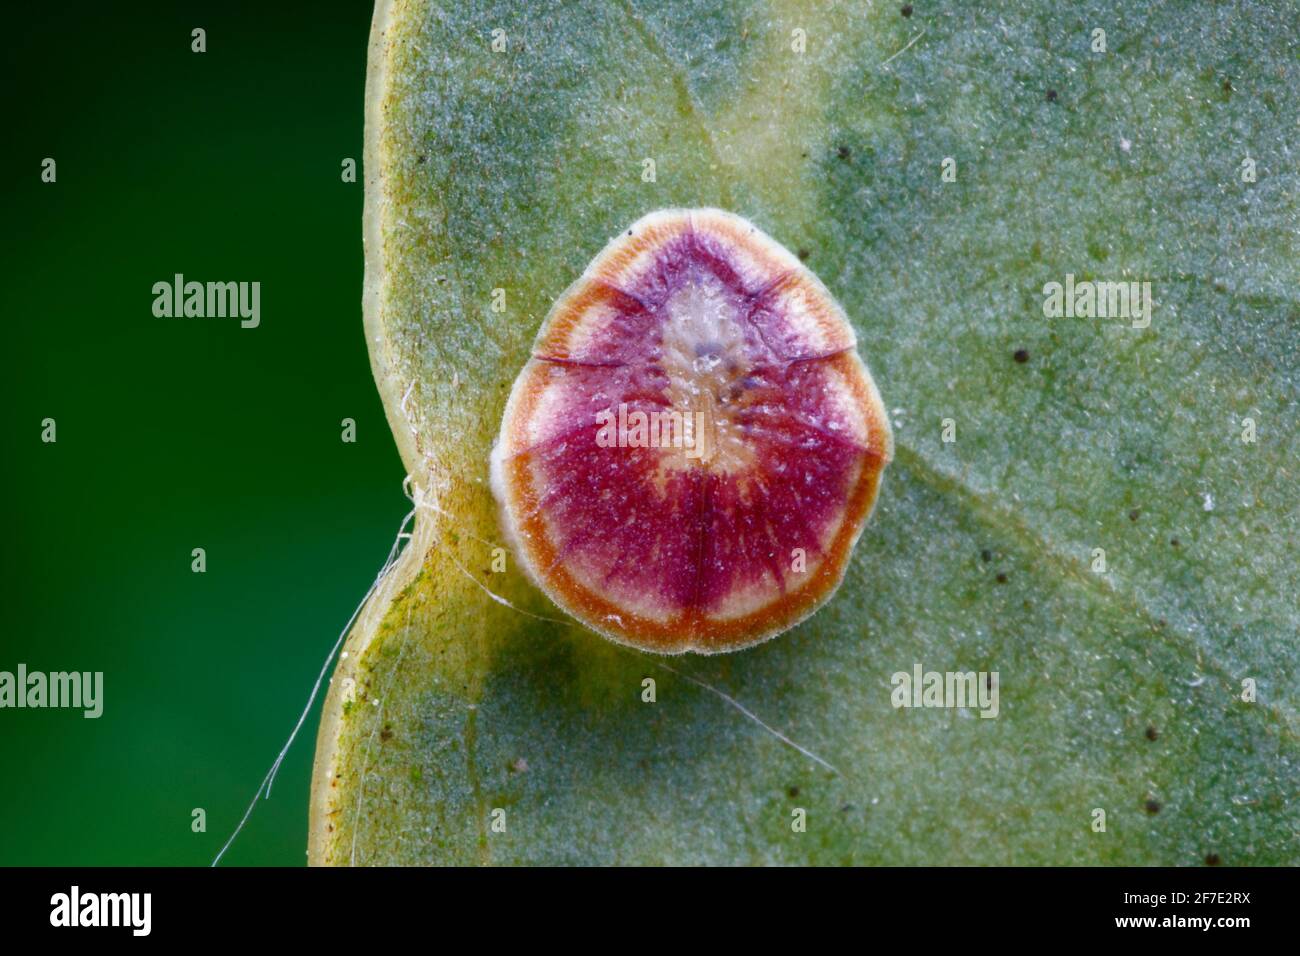 A scale insect, Protopulvinaria pyriformis, attached to a leaf. Stock Photo